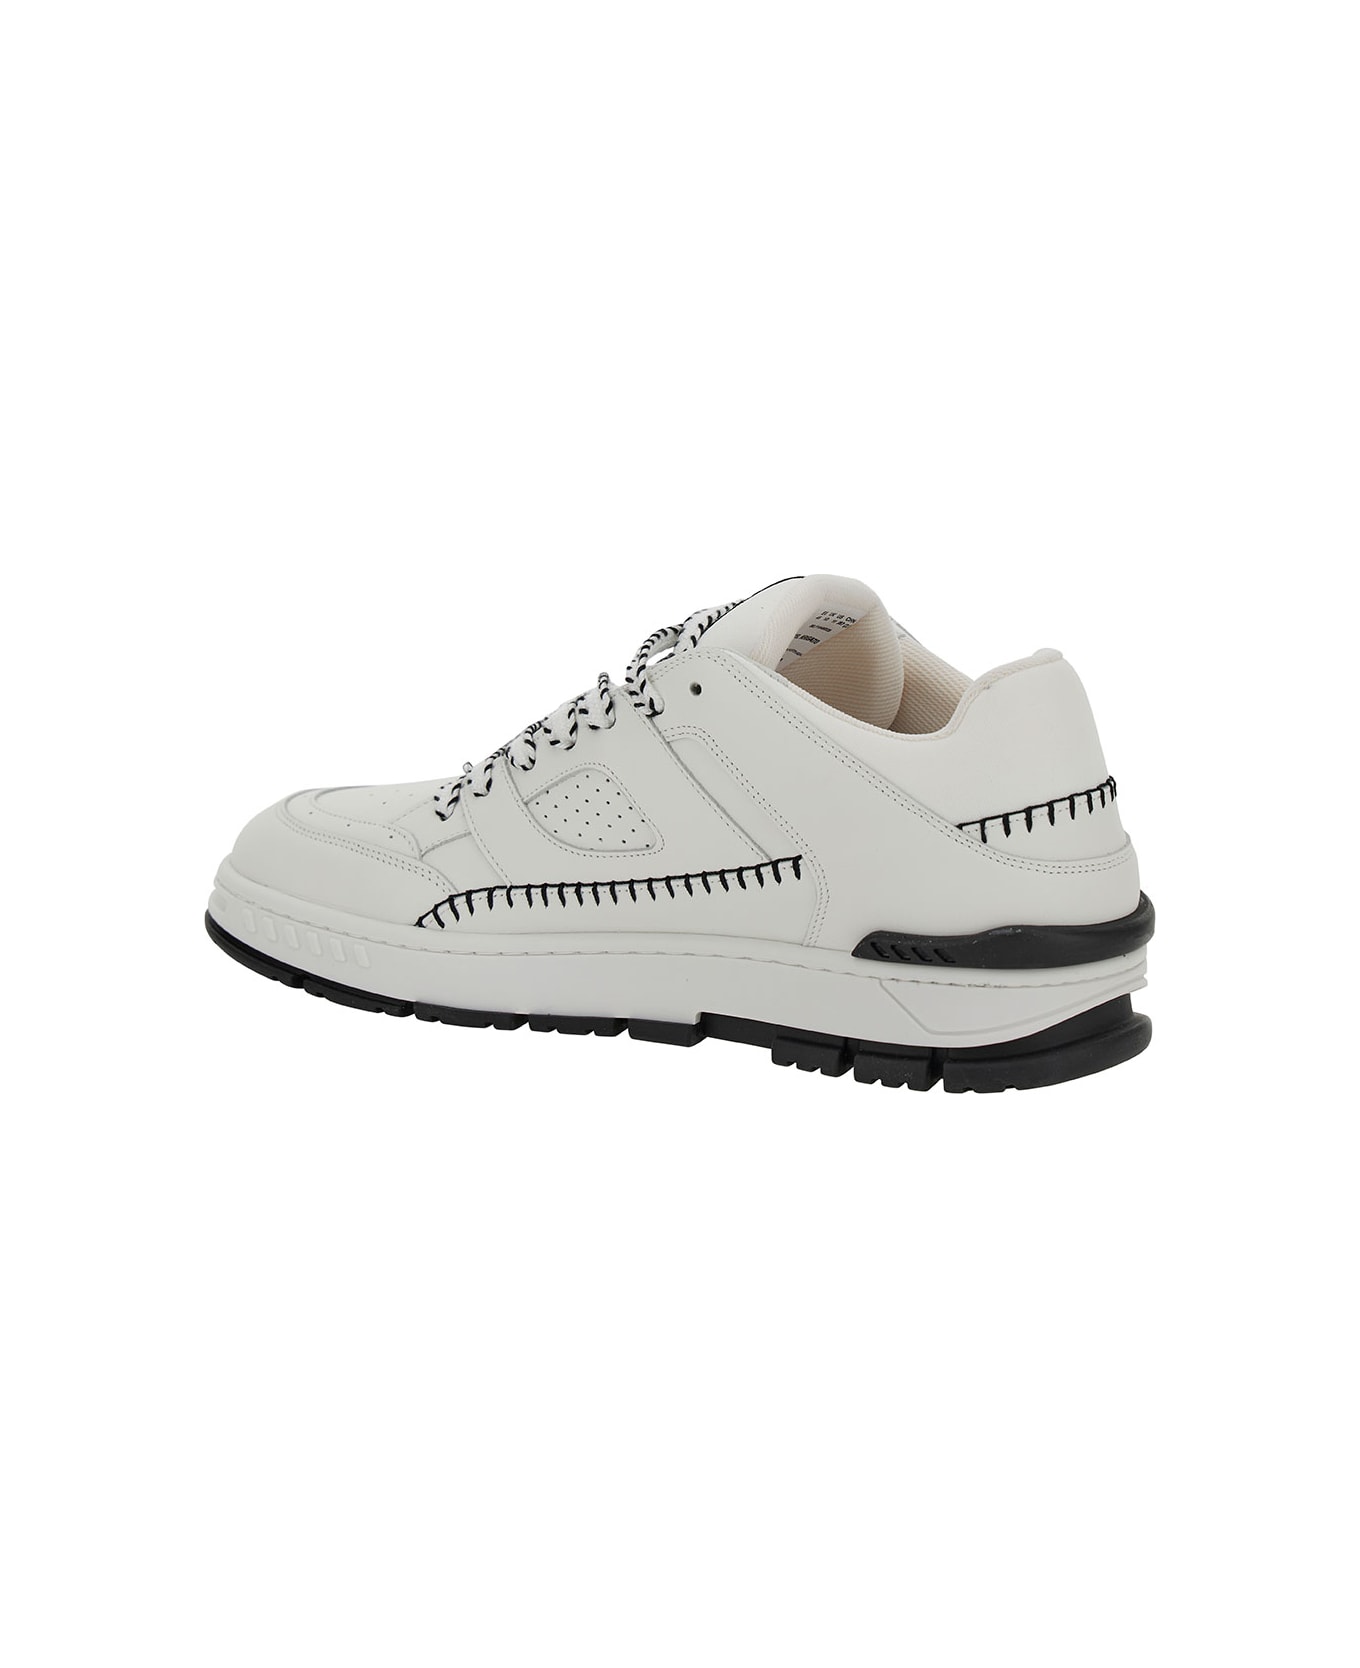 Axel Arigato 'area Lo Sneaker Stitch' White Low Top Sneakers With Contrasting Stitch Detail In Leather Man - White Black